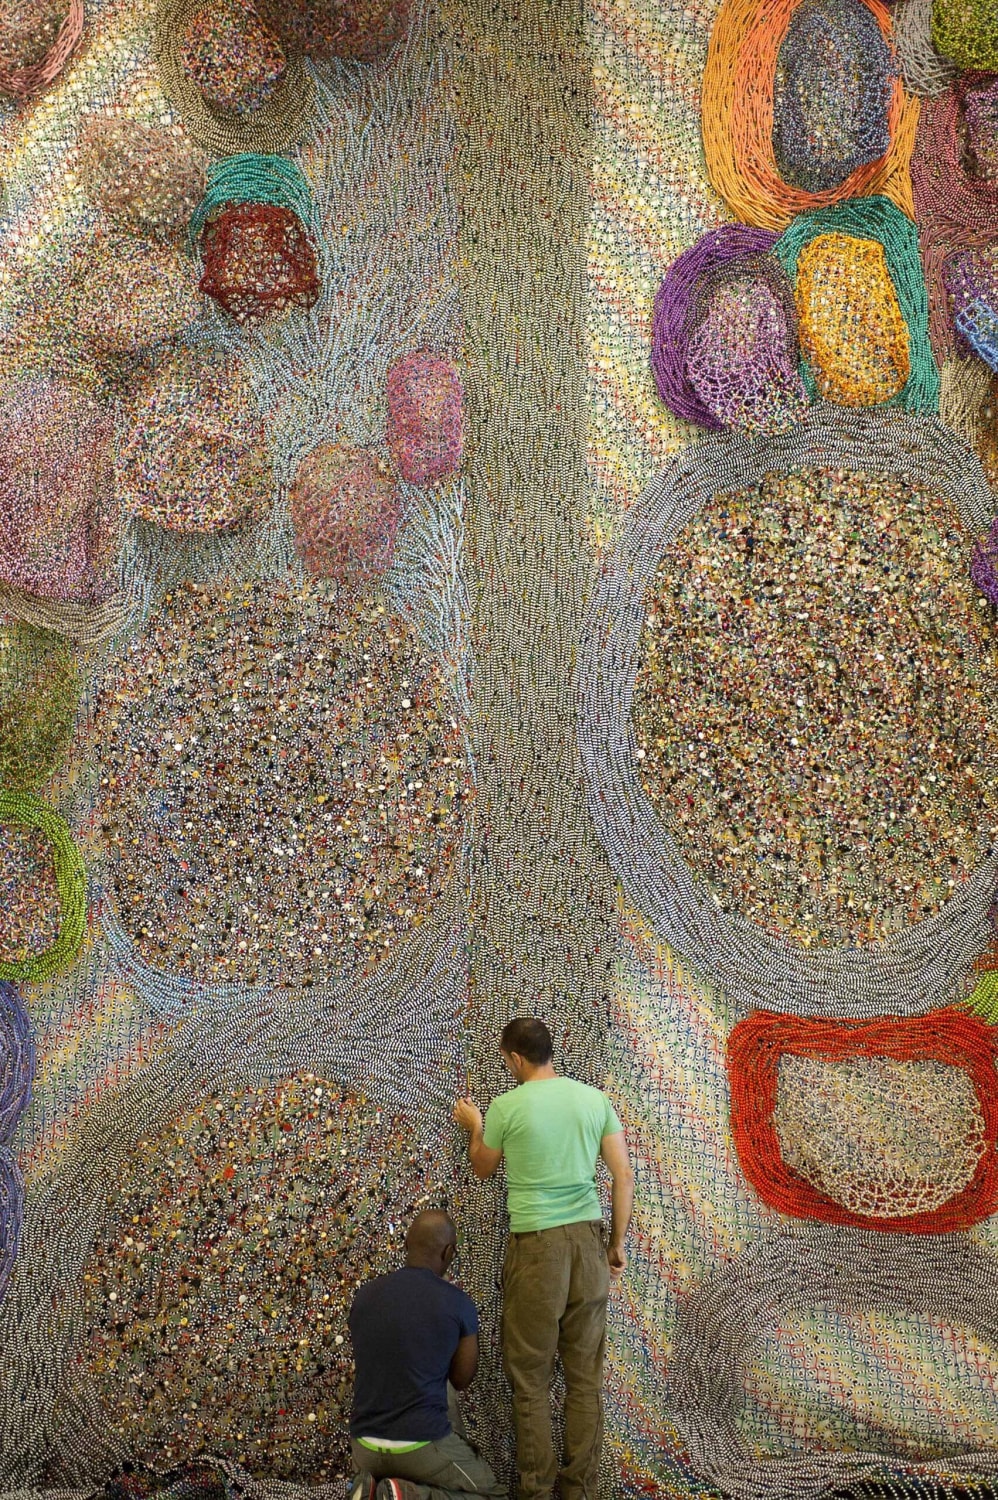 A Monumental Bas-Relief Sculpture by Nick Cave Connects Senegalese and US Cultures in Web of Beads